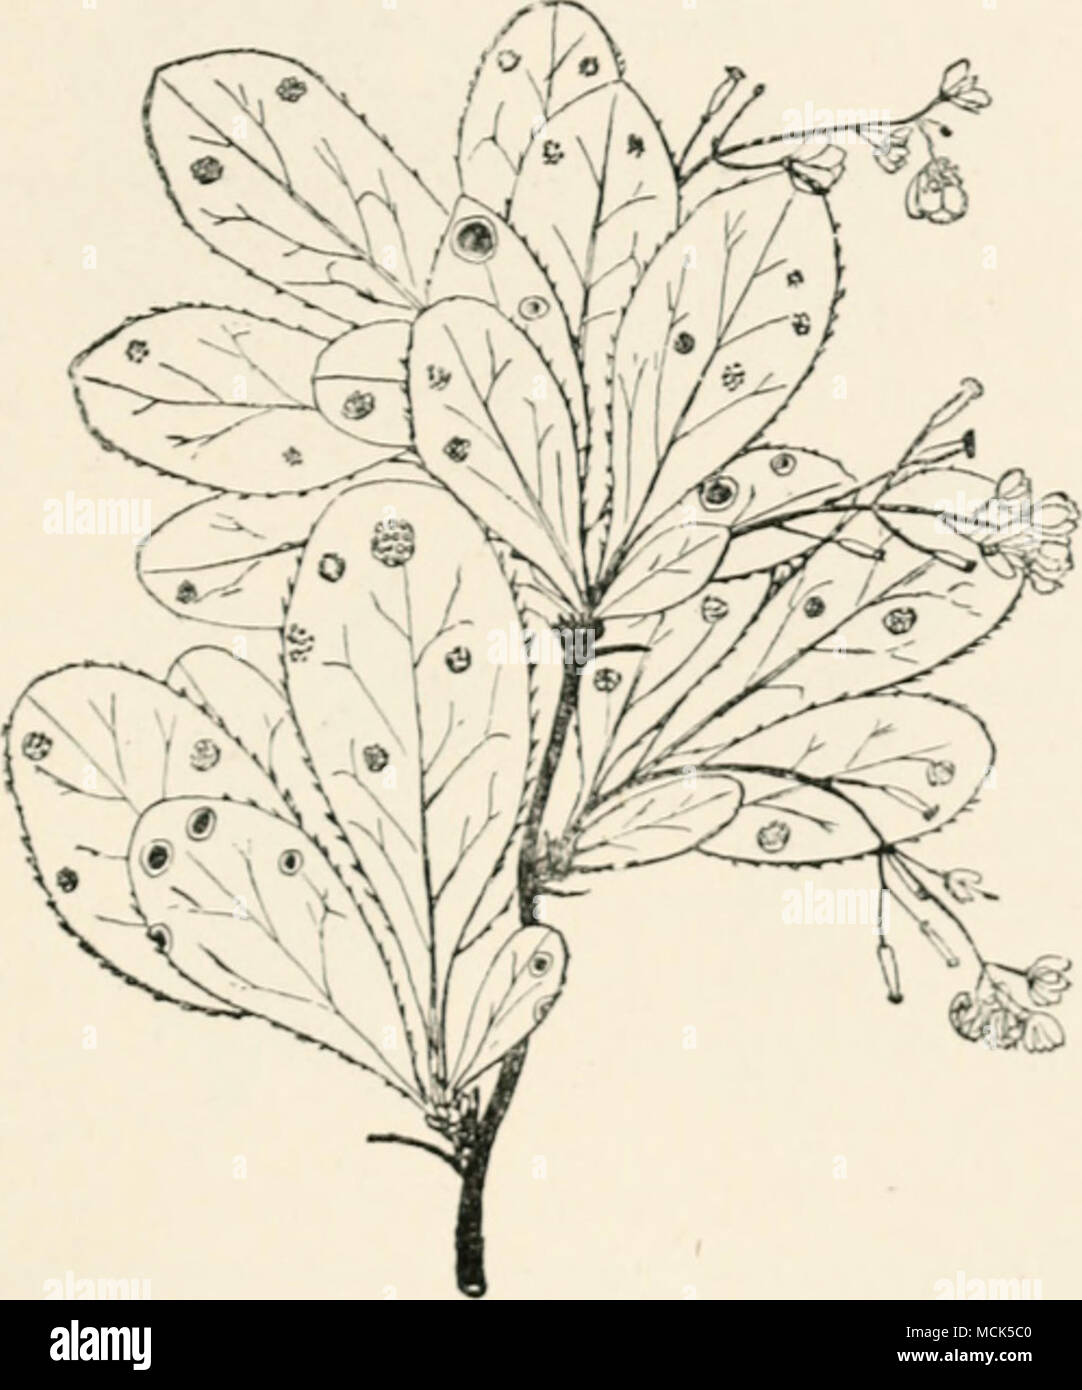 . Fig. 183.—Puecinio i/ramiiiii (Aeeidiuiii lnrUriJis) on BerUris co»niiuni». Tlie lowest leaf and tWD othcis ure Hccn on the upper surface, and show red spots with liKht niarto»», i&quot; which the pycnidia are embedded. The other leave.s «how the under surface with patches of aecidia. (v. Tubeuf del.) to their iieighljours to I'oiiii the peiidiuiu. diseased ])i)rtinns of leaves become considerably thickened. The cells of the single layer of palisade parenchyma are abnormally elongated, and the intercellular spaces of the spongy parenchyma, instead of being large, are small and filled wiili m Stock Photo